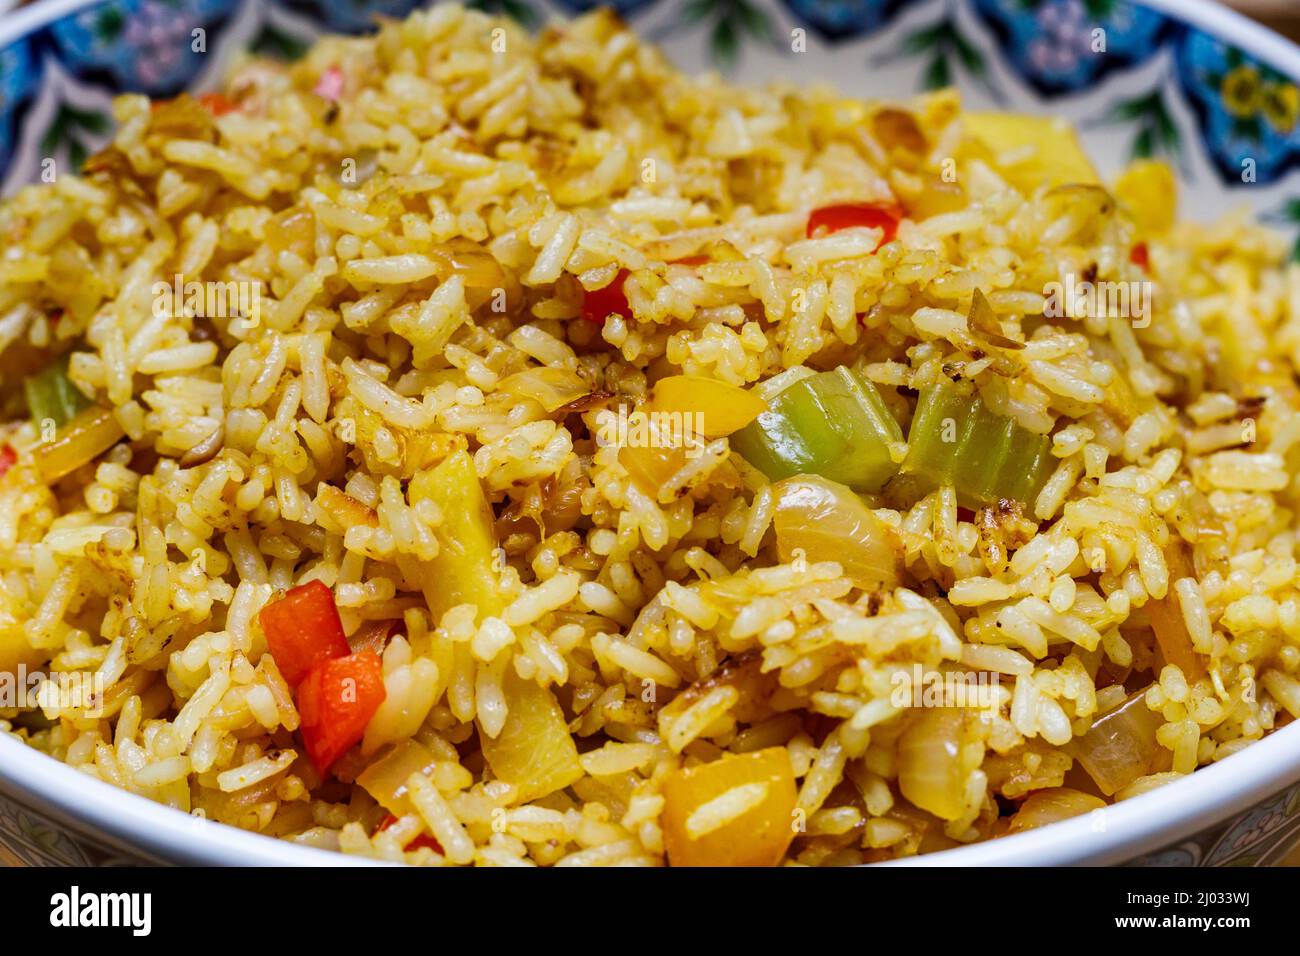 Caribbean Fried Rice With Peppers And Celery Stock Photo Alamy